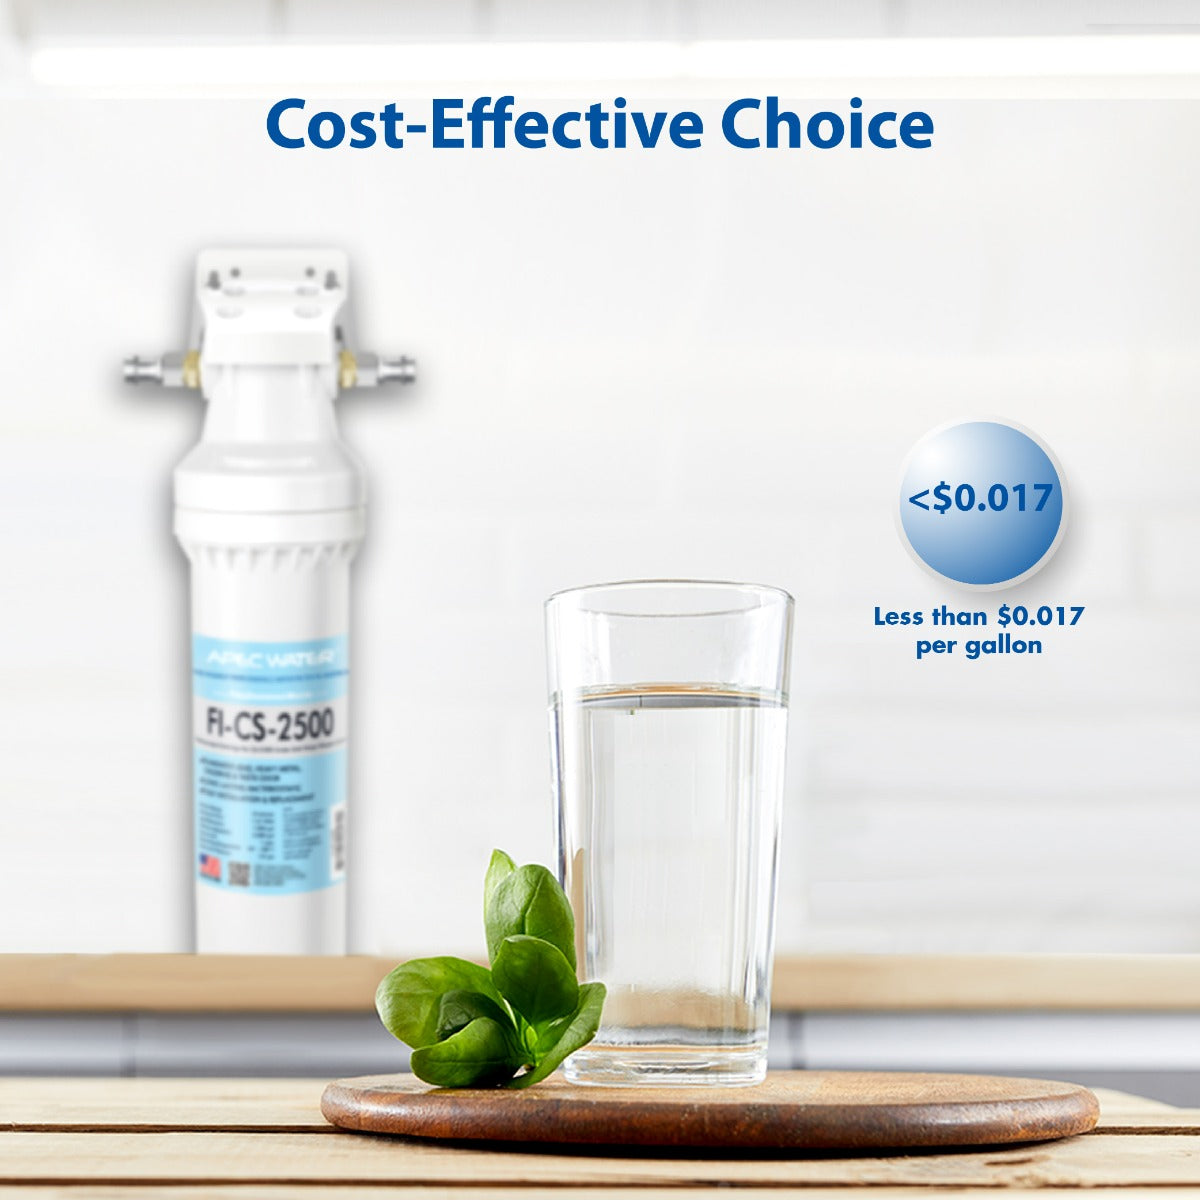 Premium Quality High Capacity Under-Counter Water Filtration System (CS-2500)